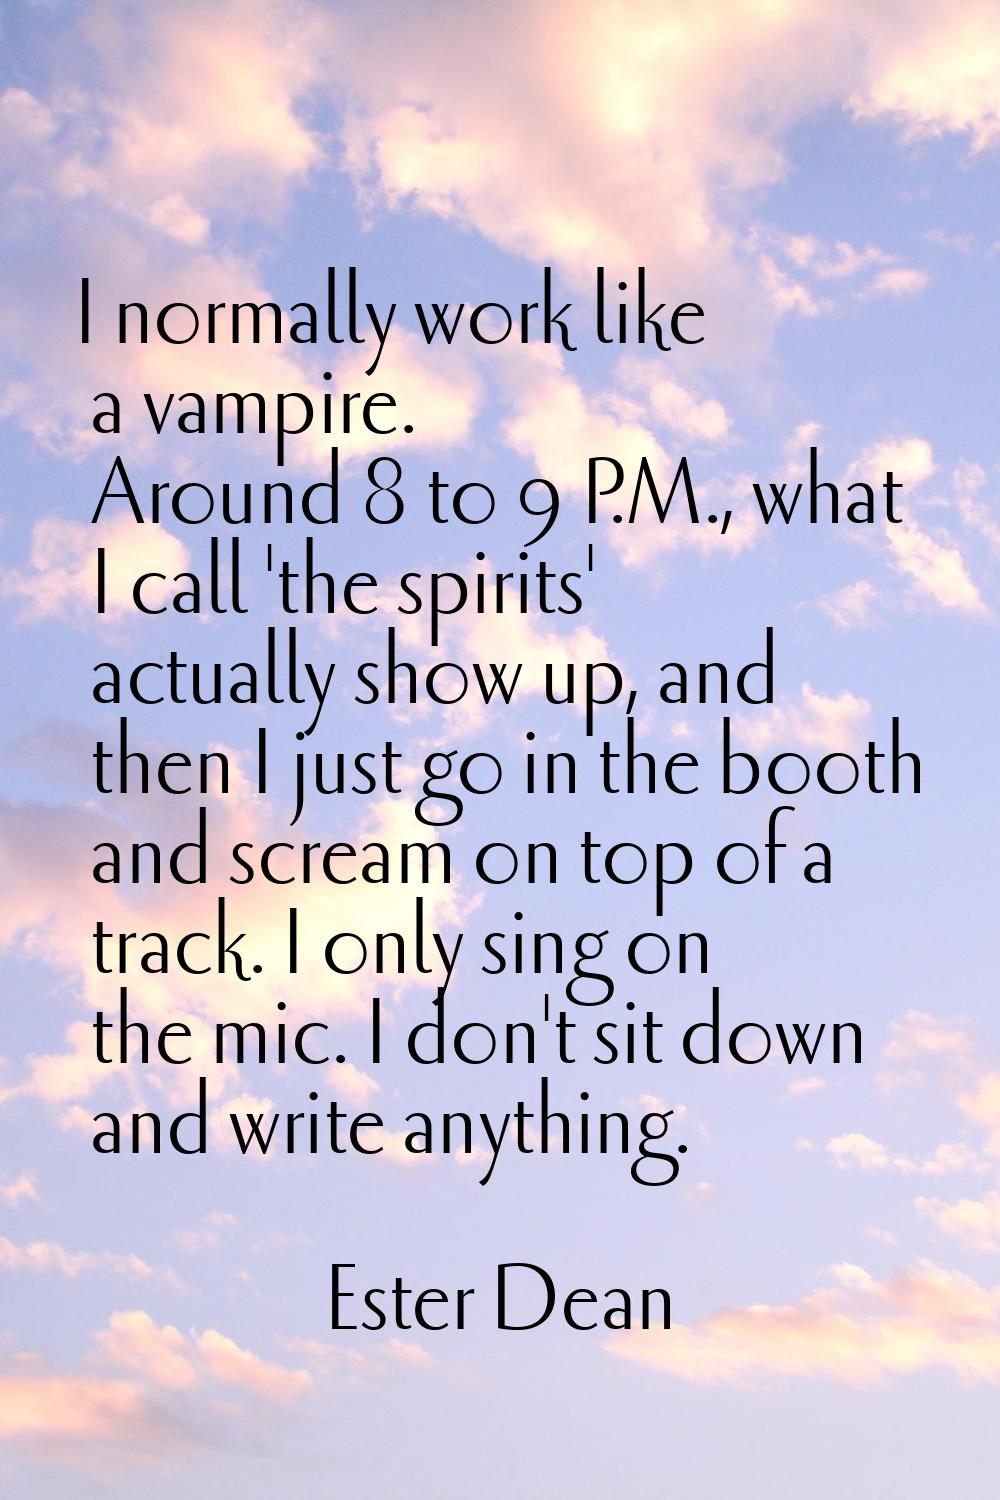 I normally work like a vampire. Around 8 to 9 P.M., what I call 'the spirits' actually show up, and